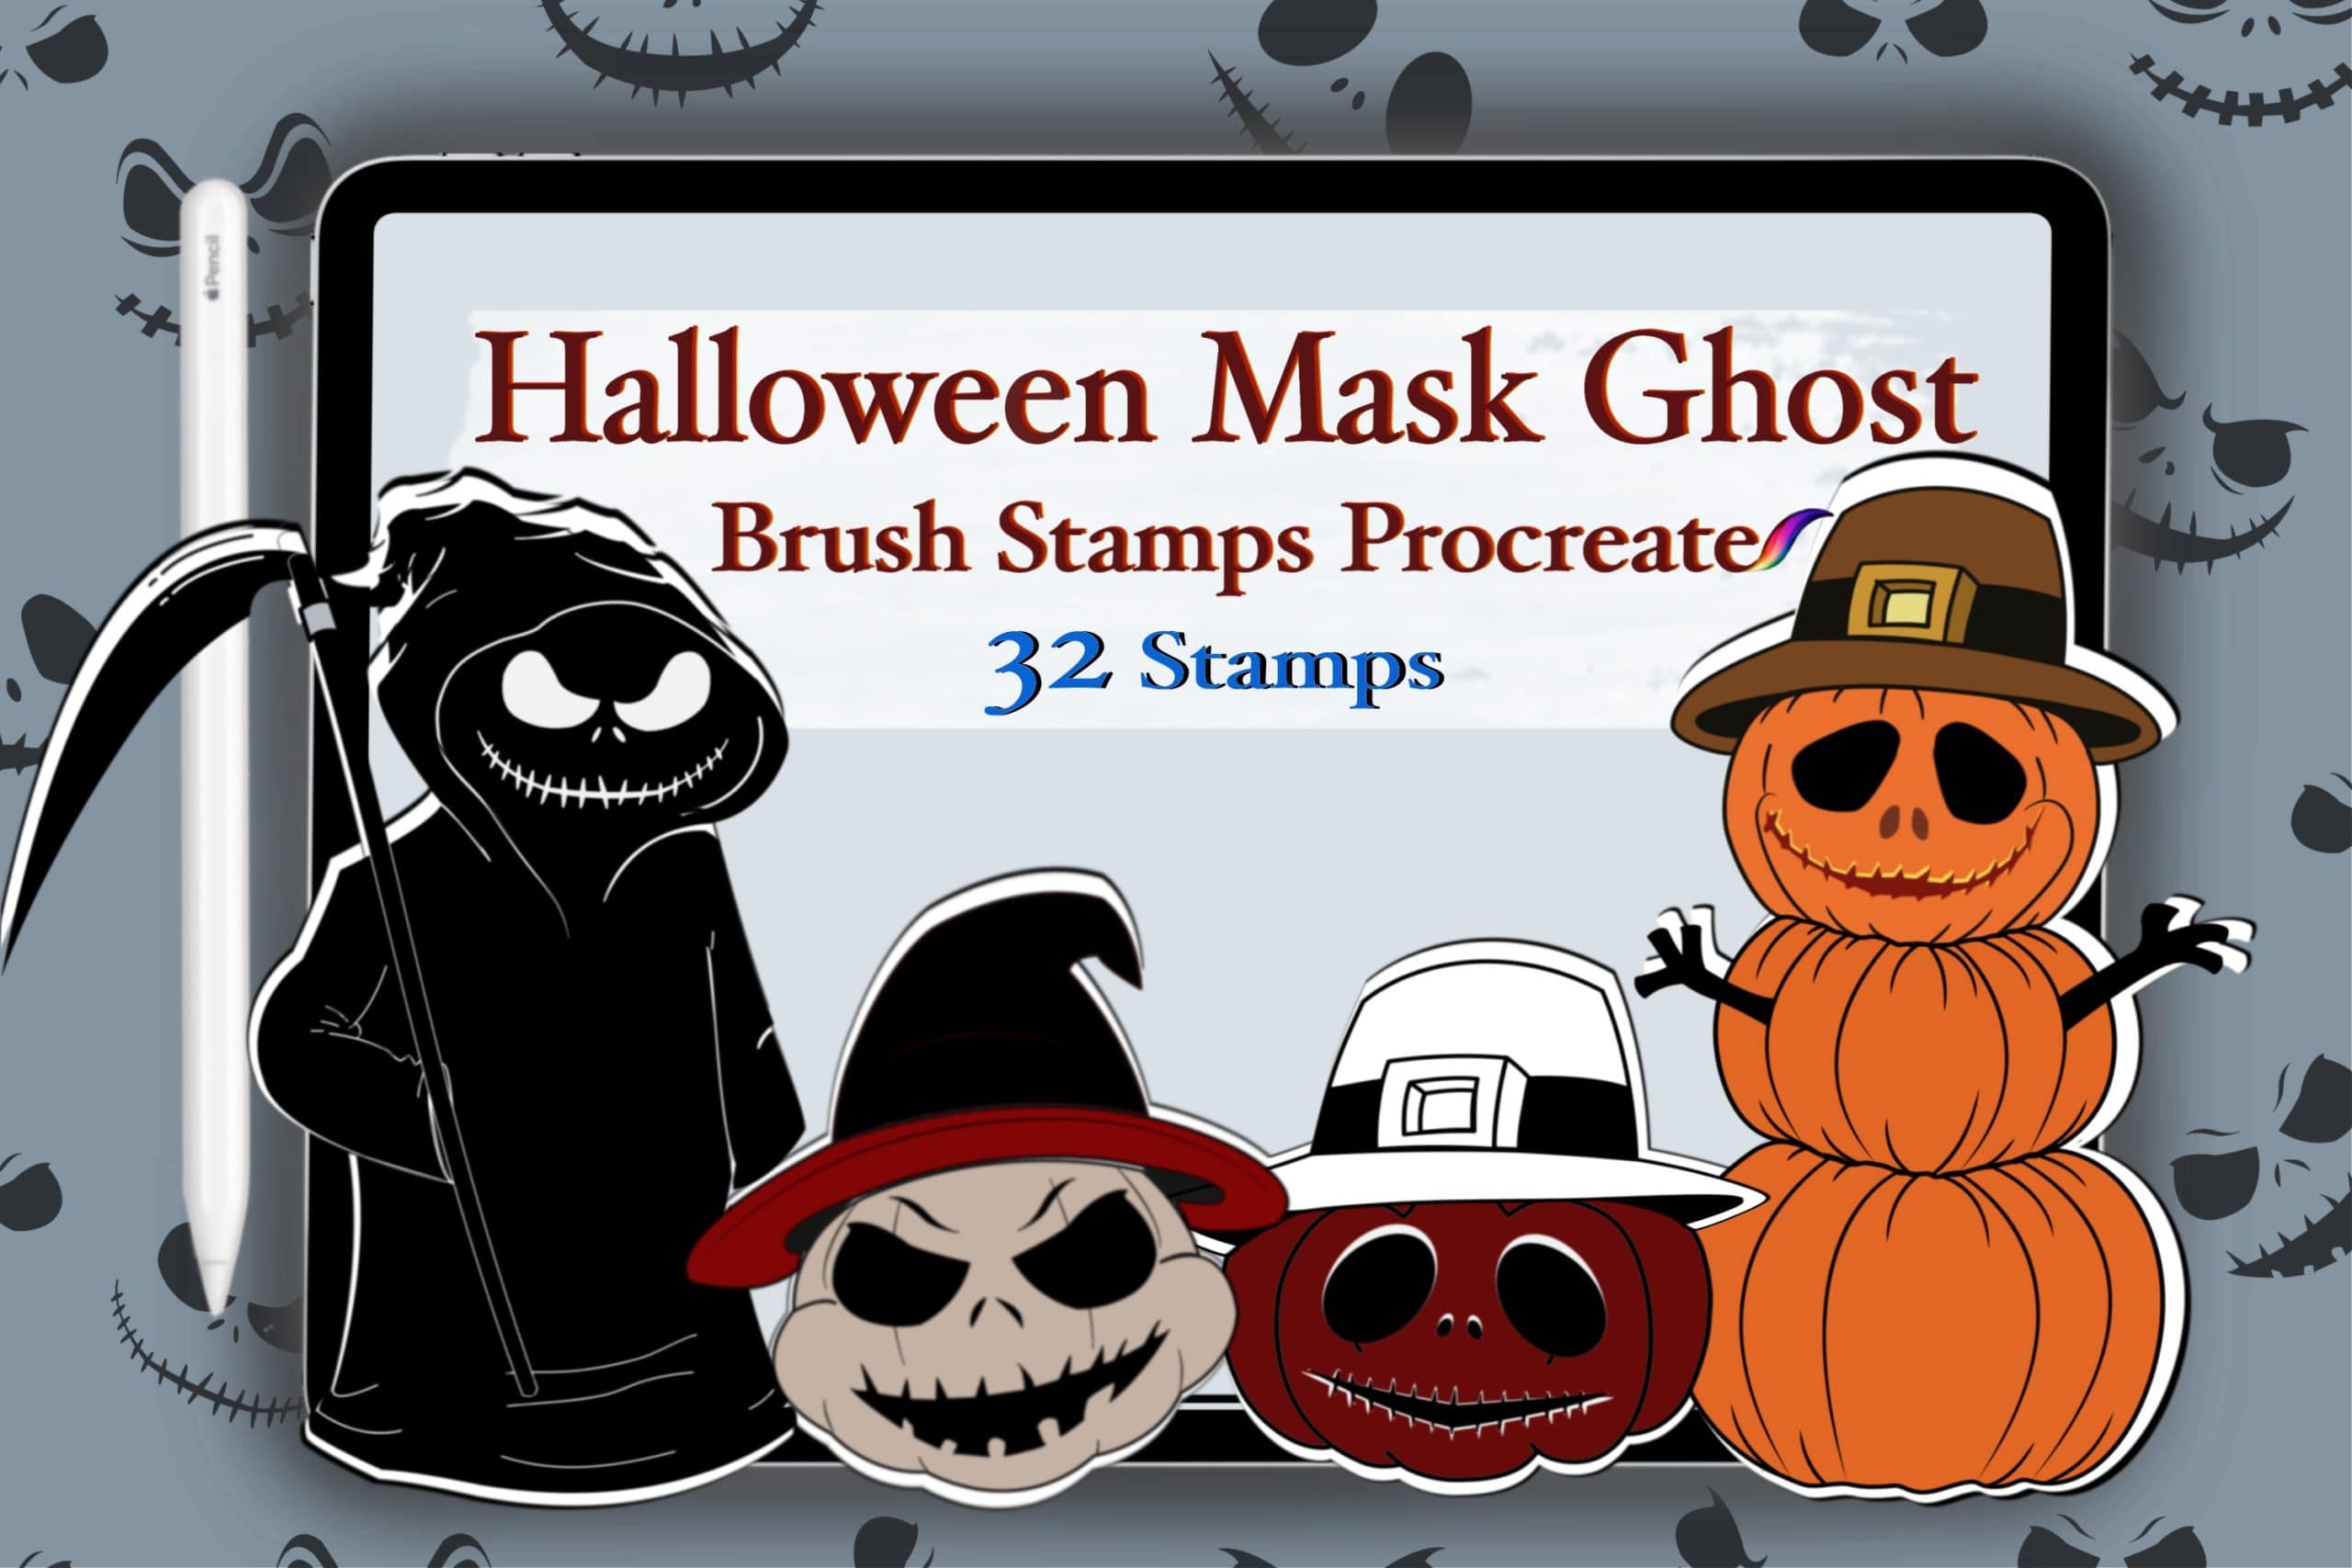 Procreate Ghost Mask Halloween Brush Stamps